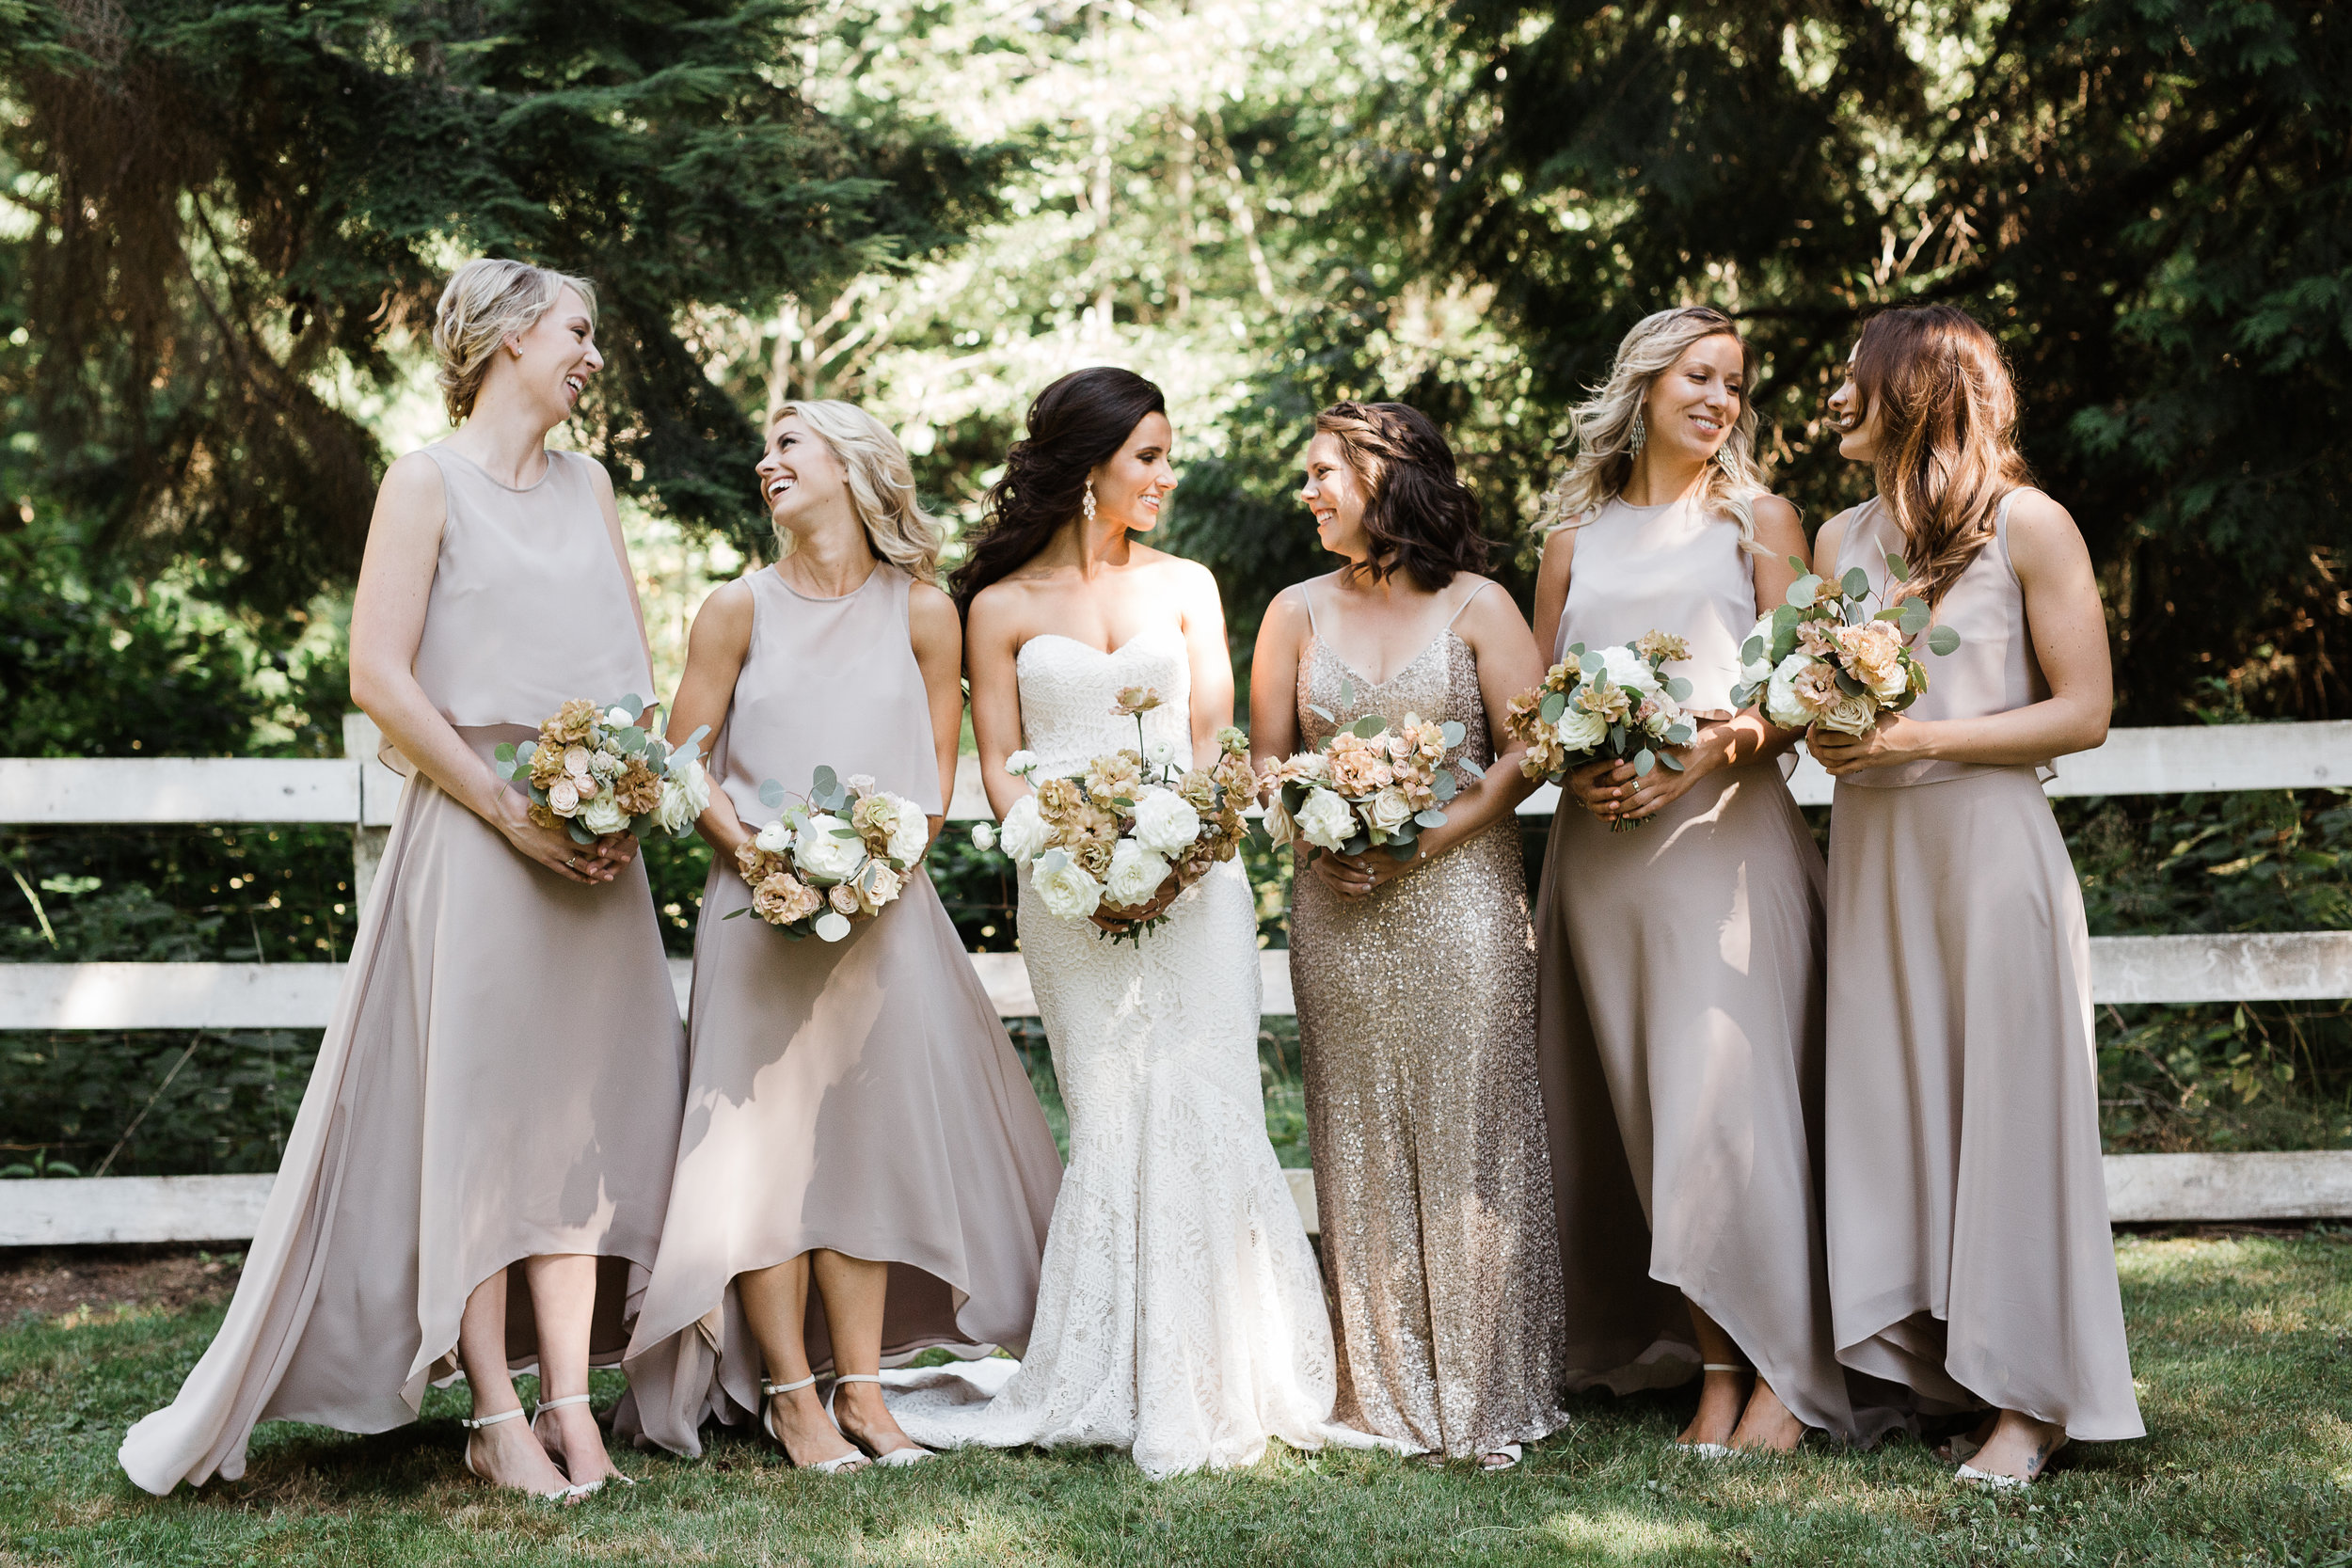 Wild Bloom Floral - Rachel Birkhofer Photography - Jessica and Phil - Real Wedding - Seattle.jpeg